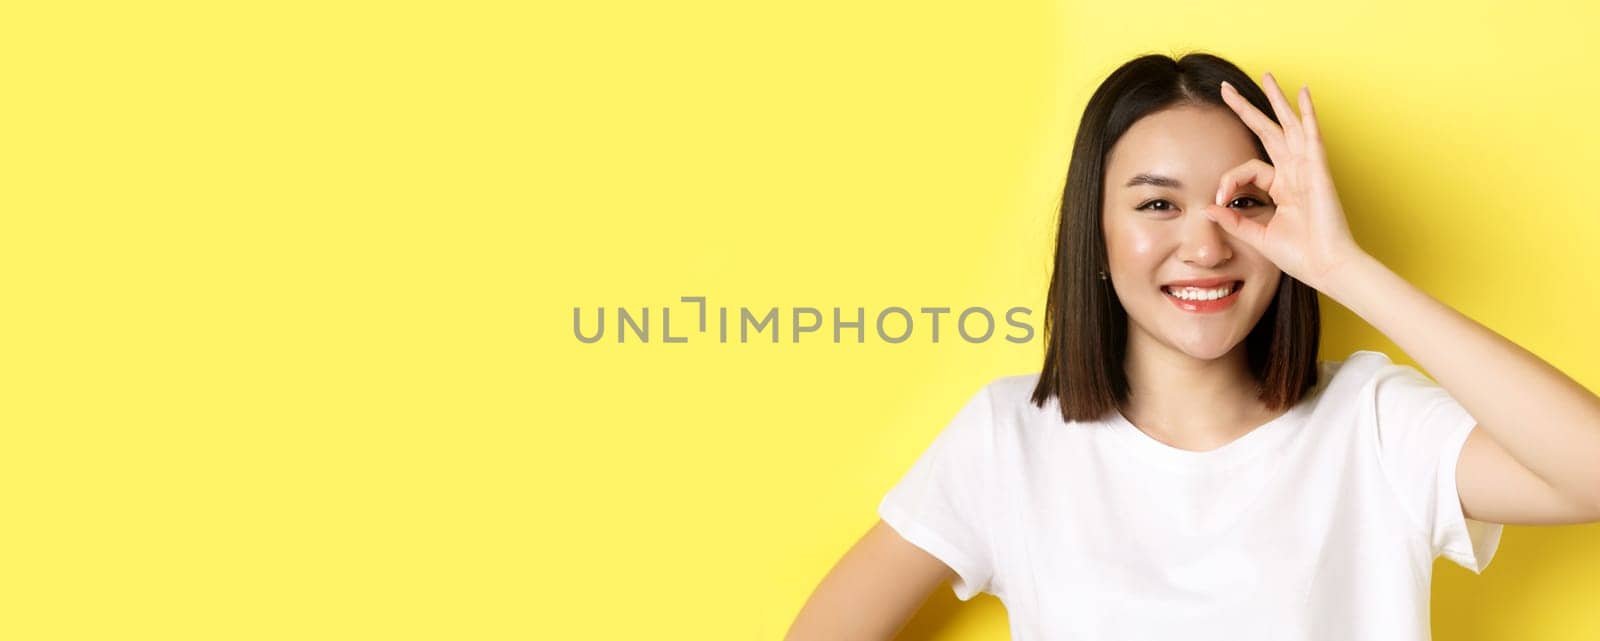 Close up of cute asian girl feeling happy, showing OK sign on eye and smiling, standing over yellow background.